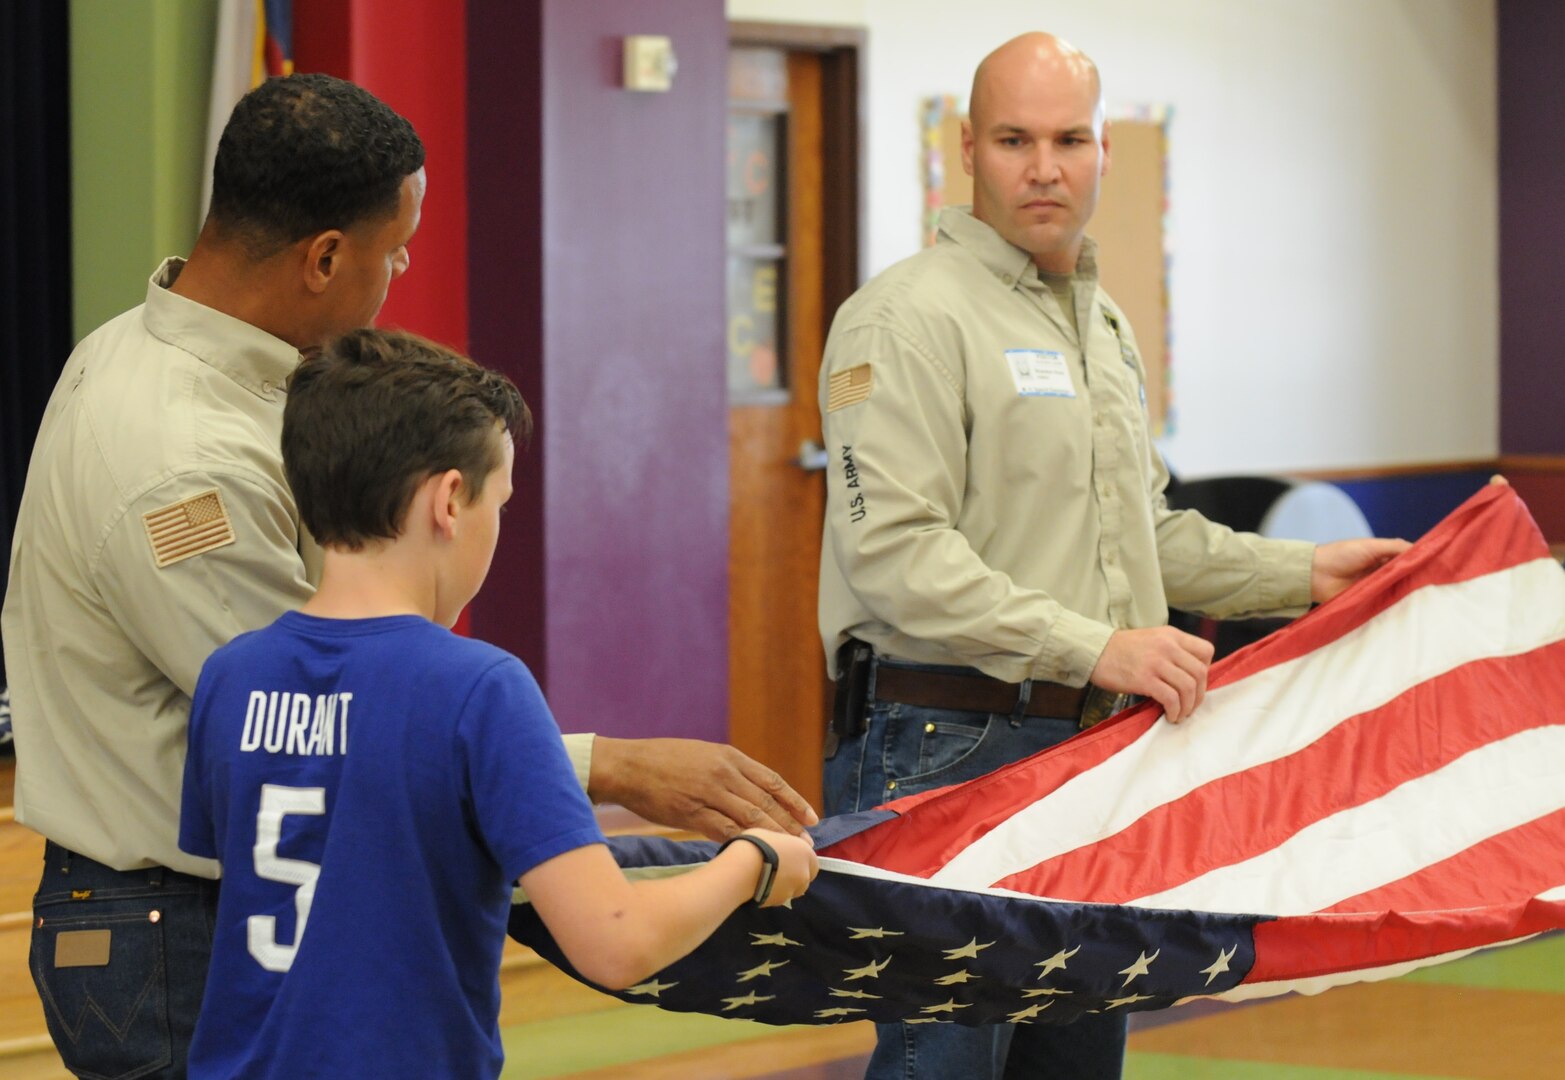 A fifth grader at Specht Elementary School in San Antonio is coached by Staff Sgt. Darren O. Thomas (left) and  Staff Sgt. Brandon Hood (right) from the Fort Sam Houston Honors Platoon Oct. 18 on how to properly fold the U.S. flag, as well as how to render proper honors when raising and lowering the flag. The students are volunteers with the task of putting up the flag in the mornings and taking it down at the end of each school day.